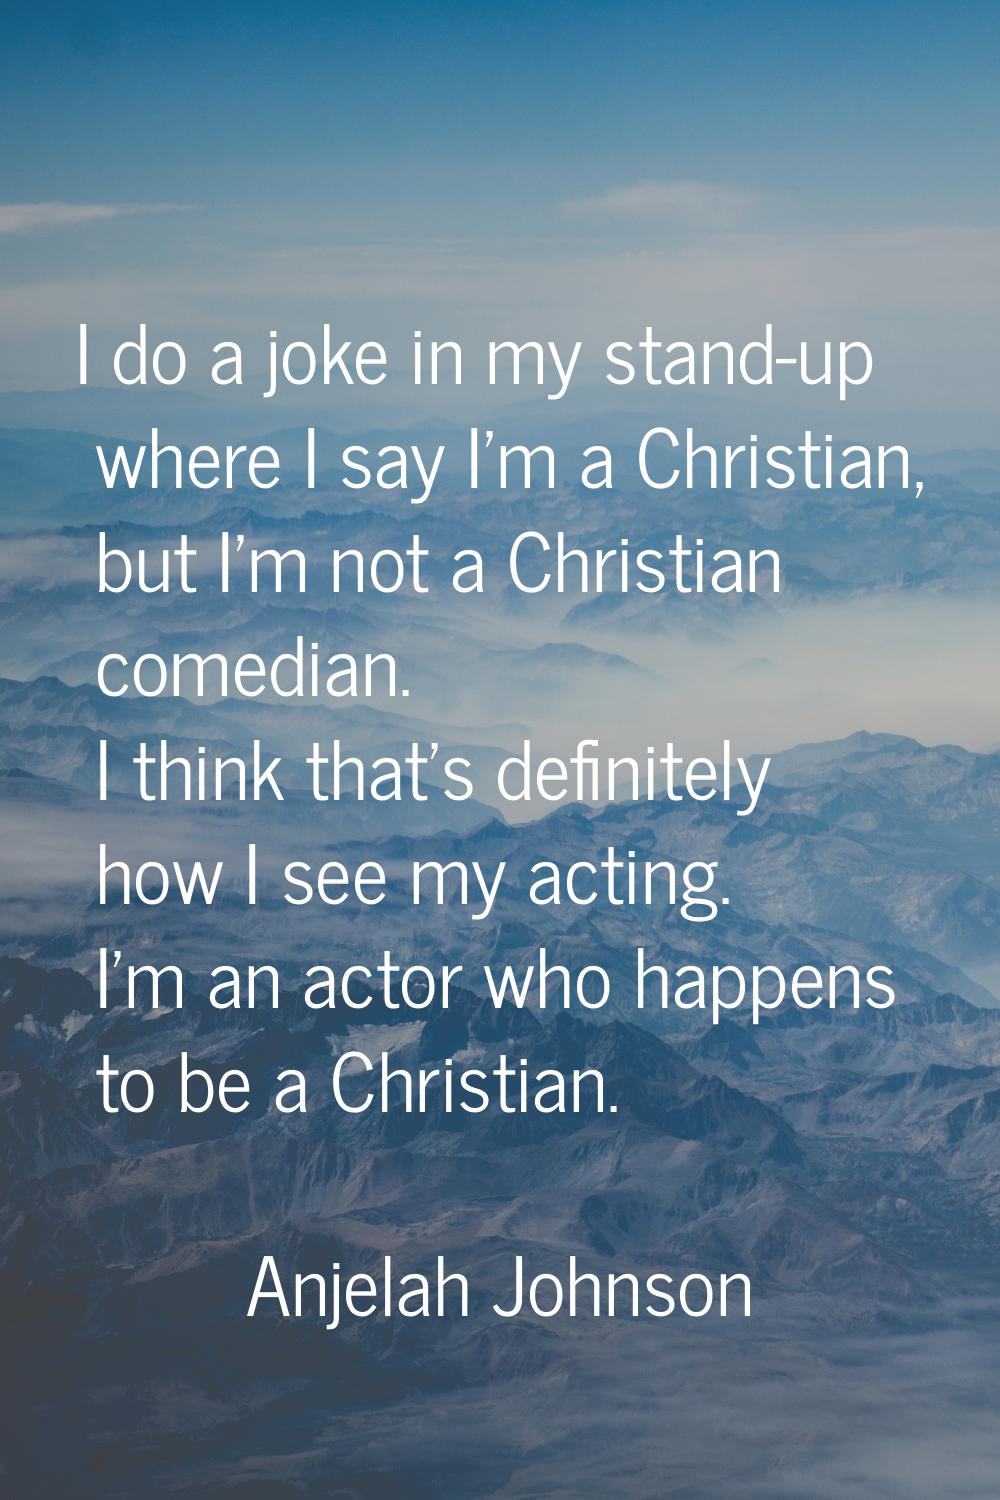 I do a joke in my stand-up where I say I'm a Christian, but I'm not a Christian comedian. I think t